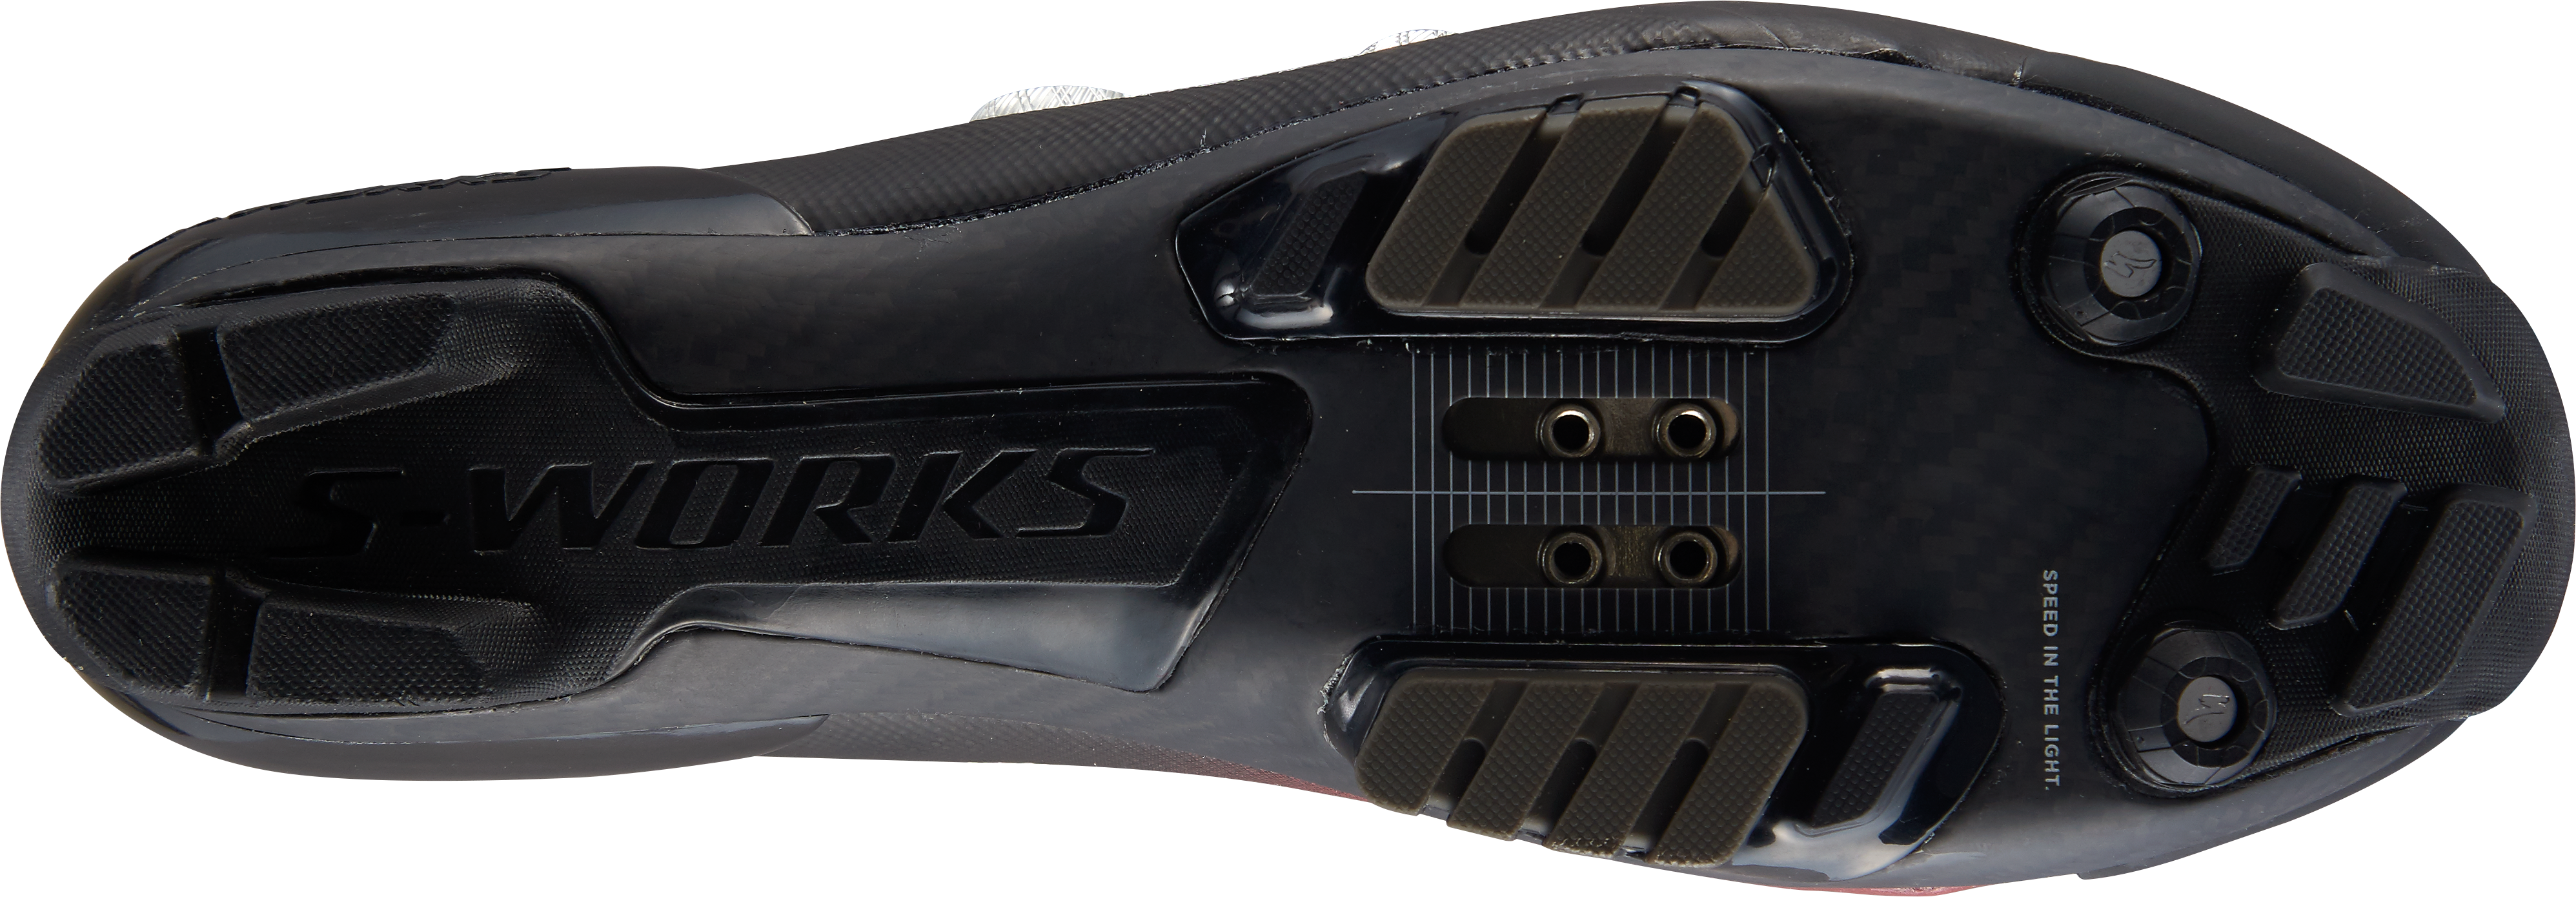 S-Works Recon Mountain Bike Shoes - Speed of Light Collection